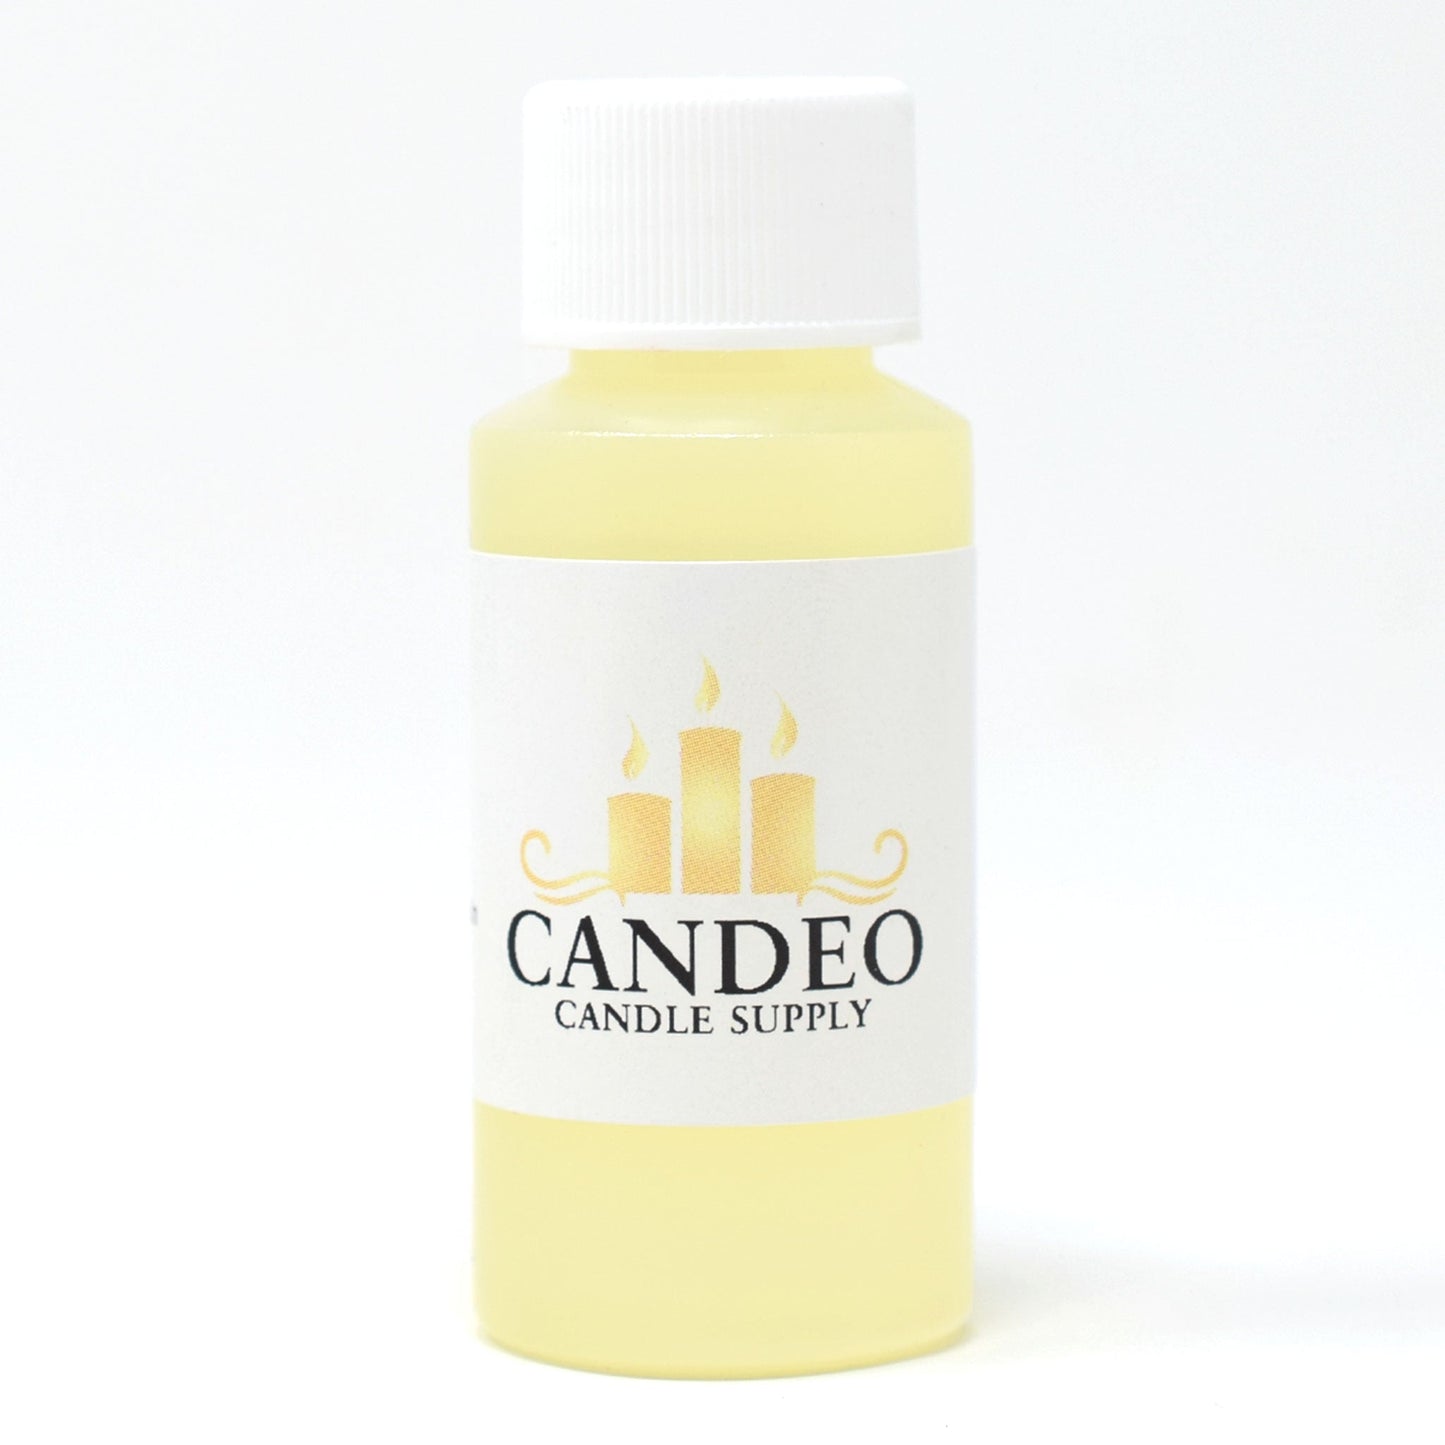 Nag Champa Fragrance Oil - Candeo Candle Supply